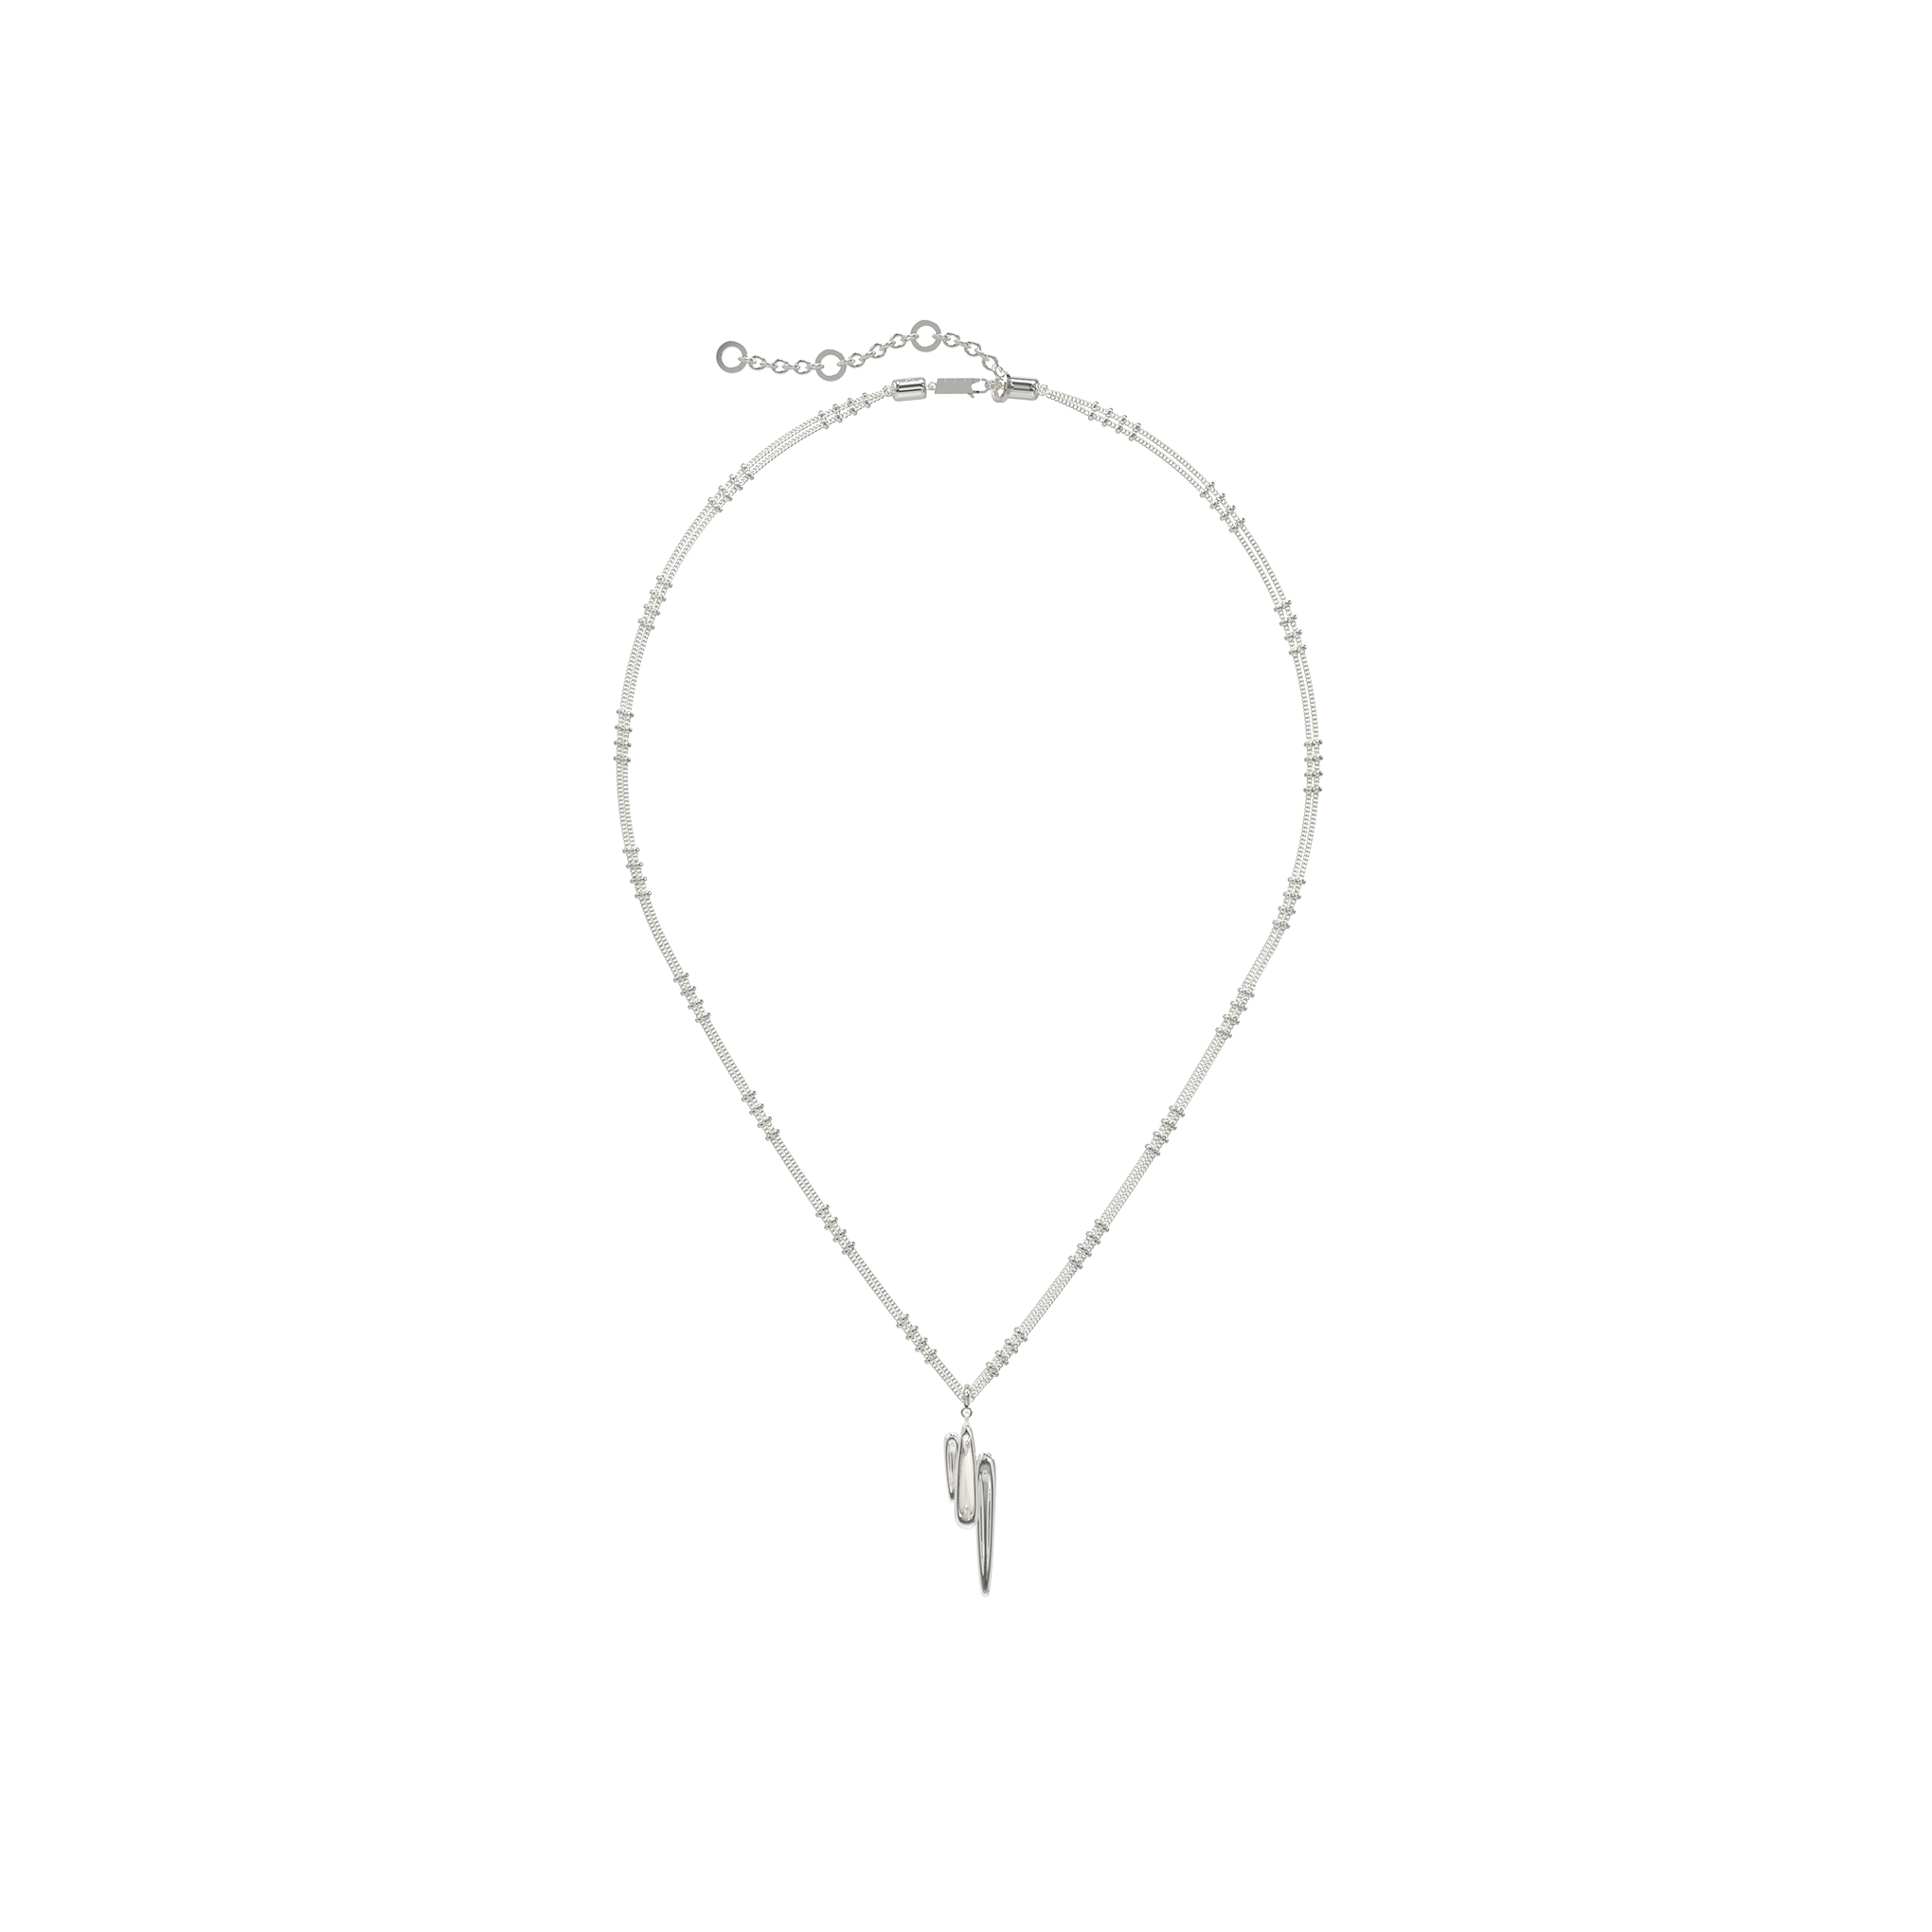 DOUBLE LOOP LONG NECKLACE - WHITE SHELL WATER DROP PENDANT A